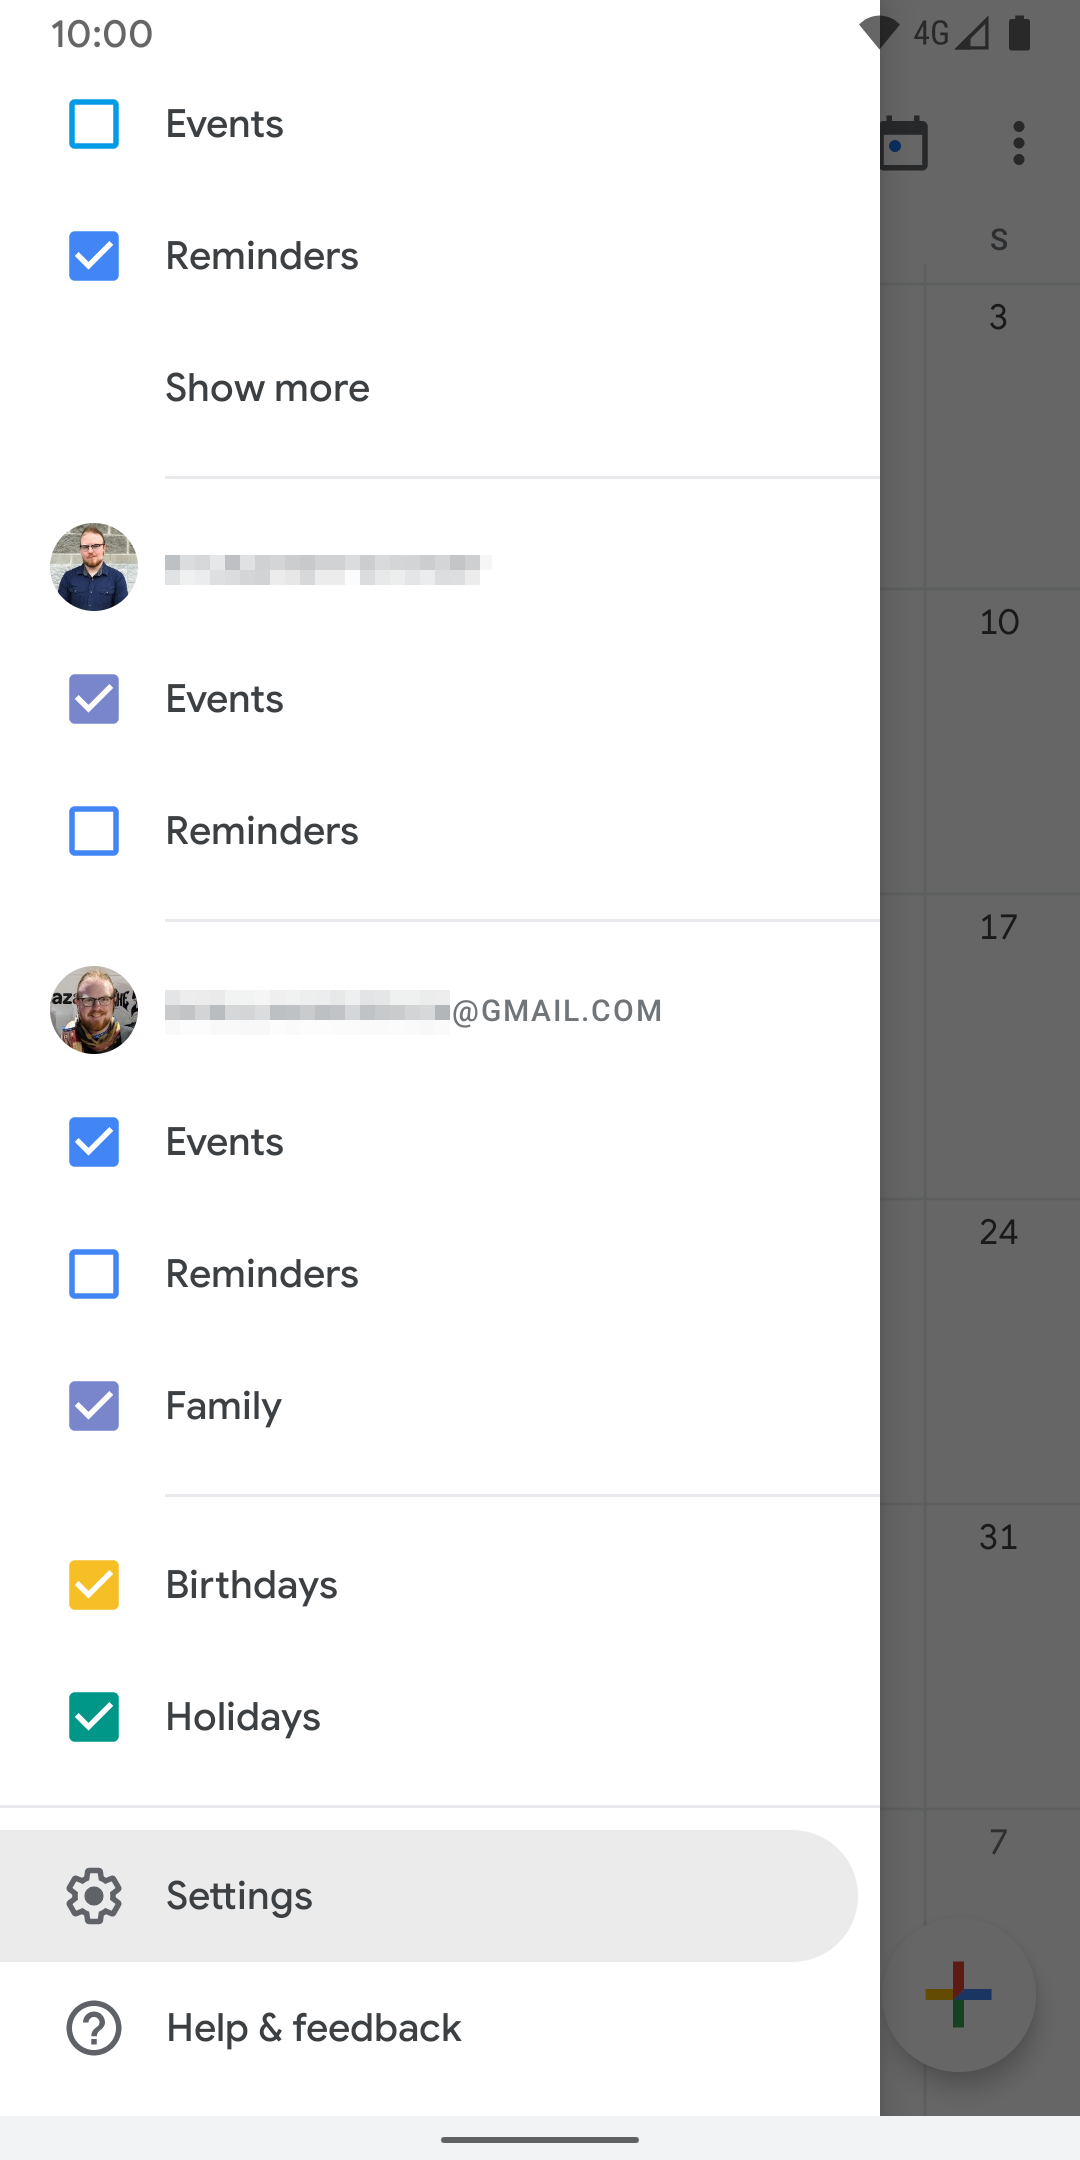 How to stop receiving spam events in your Google Calendar